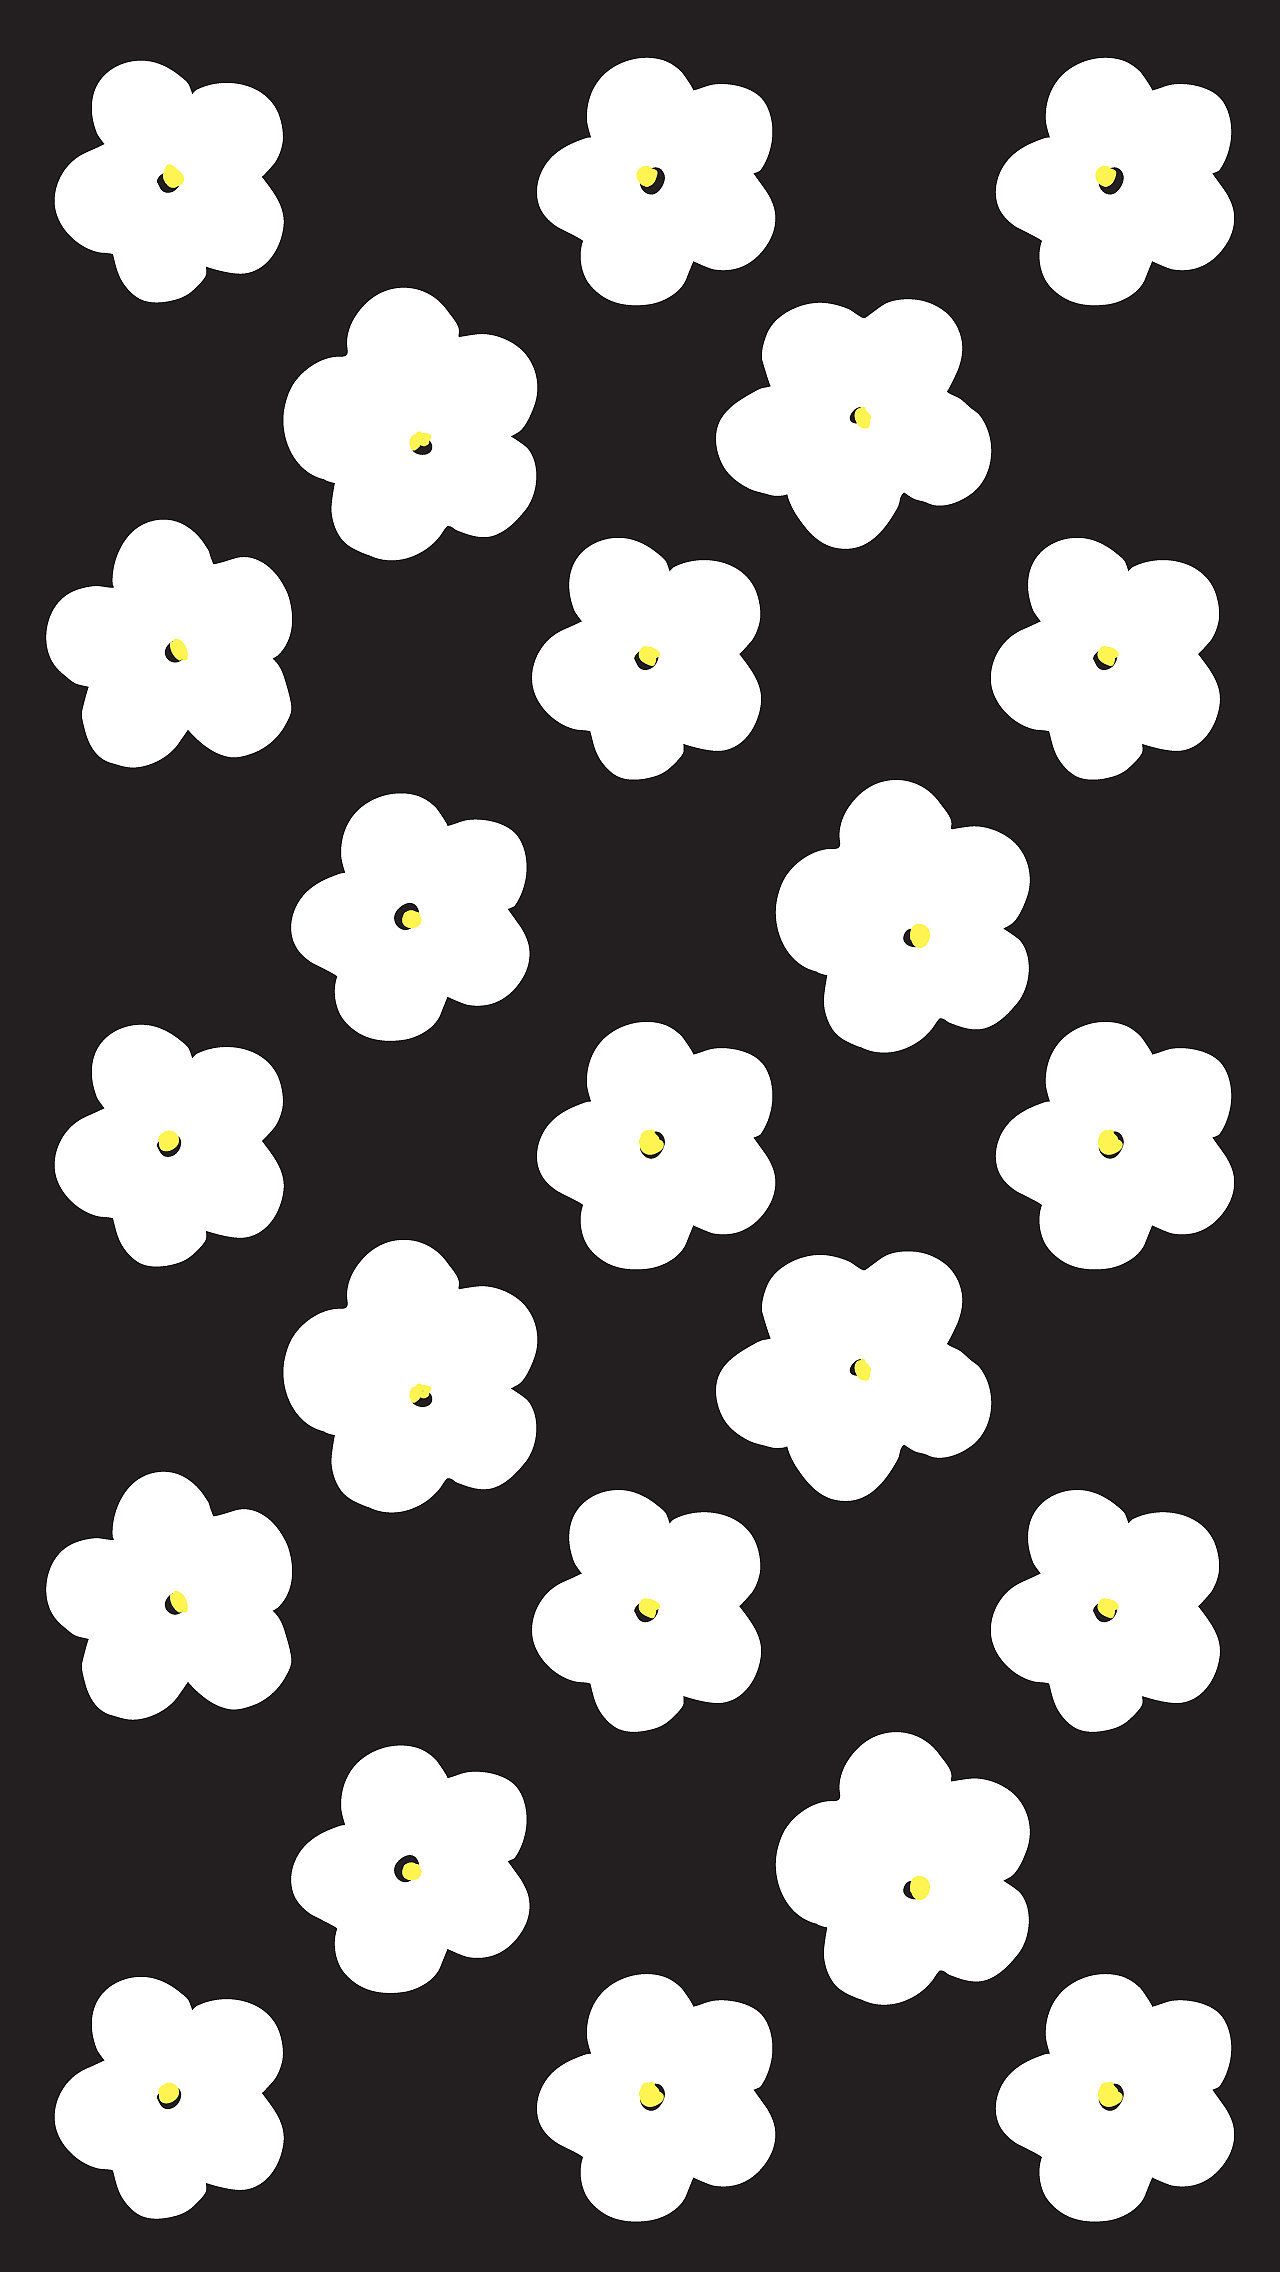 Black and White Flowers. iPhone wallpaper pattern, Best iphone wallpaper, Cute iphone 6 wallpaper